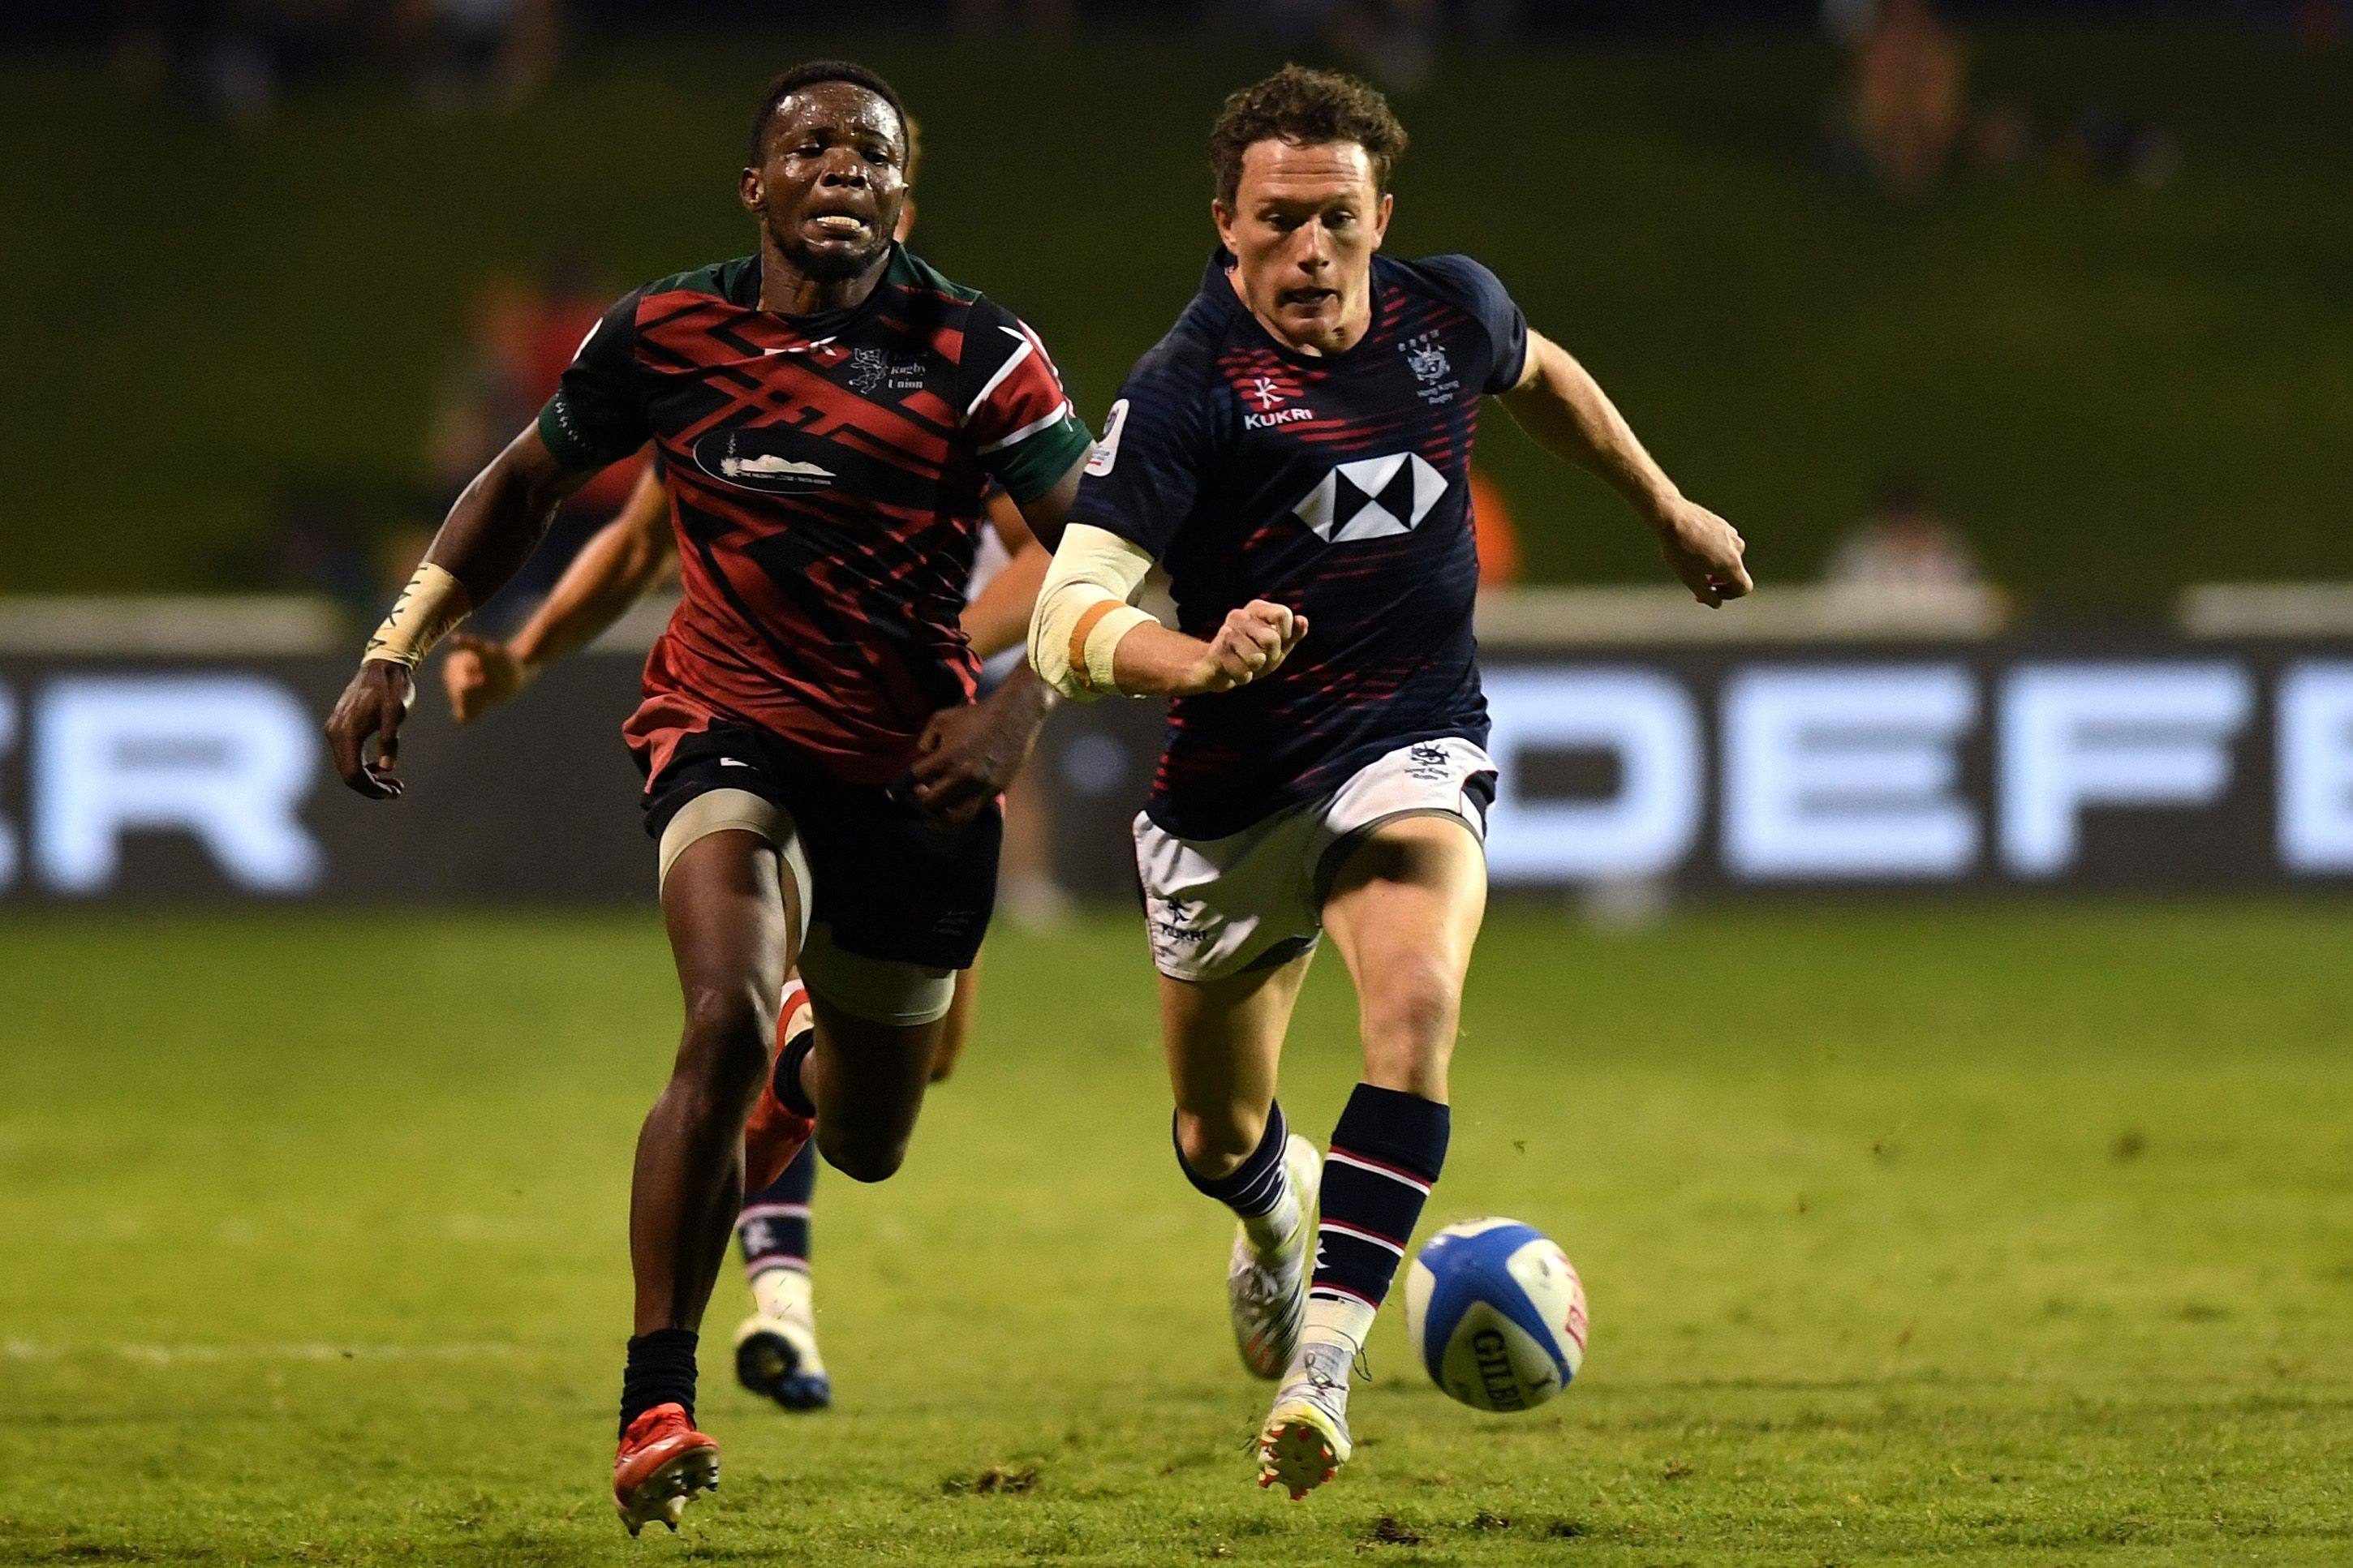 Jack Neville of Hong Kong and Bryceson Adaka of Kenya chase down a loose ball during the RWC 2023 Final Qualification Tournament match at The Sevens Stadium on November 18, 2022 in Dubai, United Arab Emirates. Photo: World Rugby via Getty Images